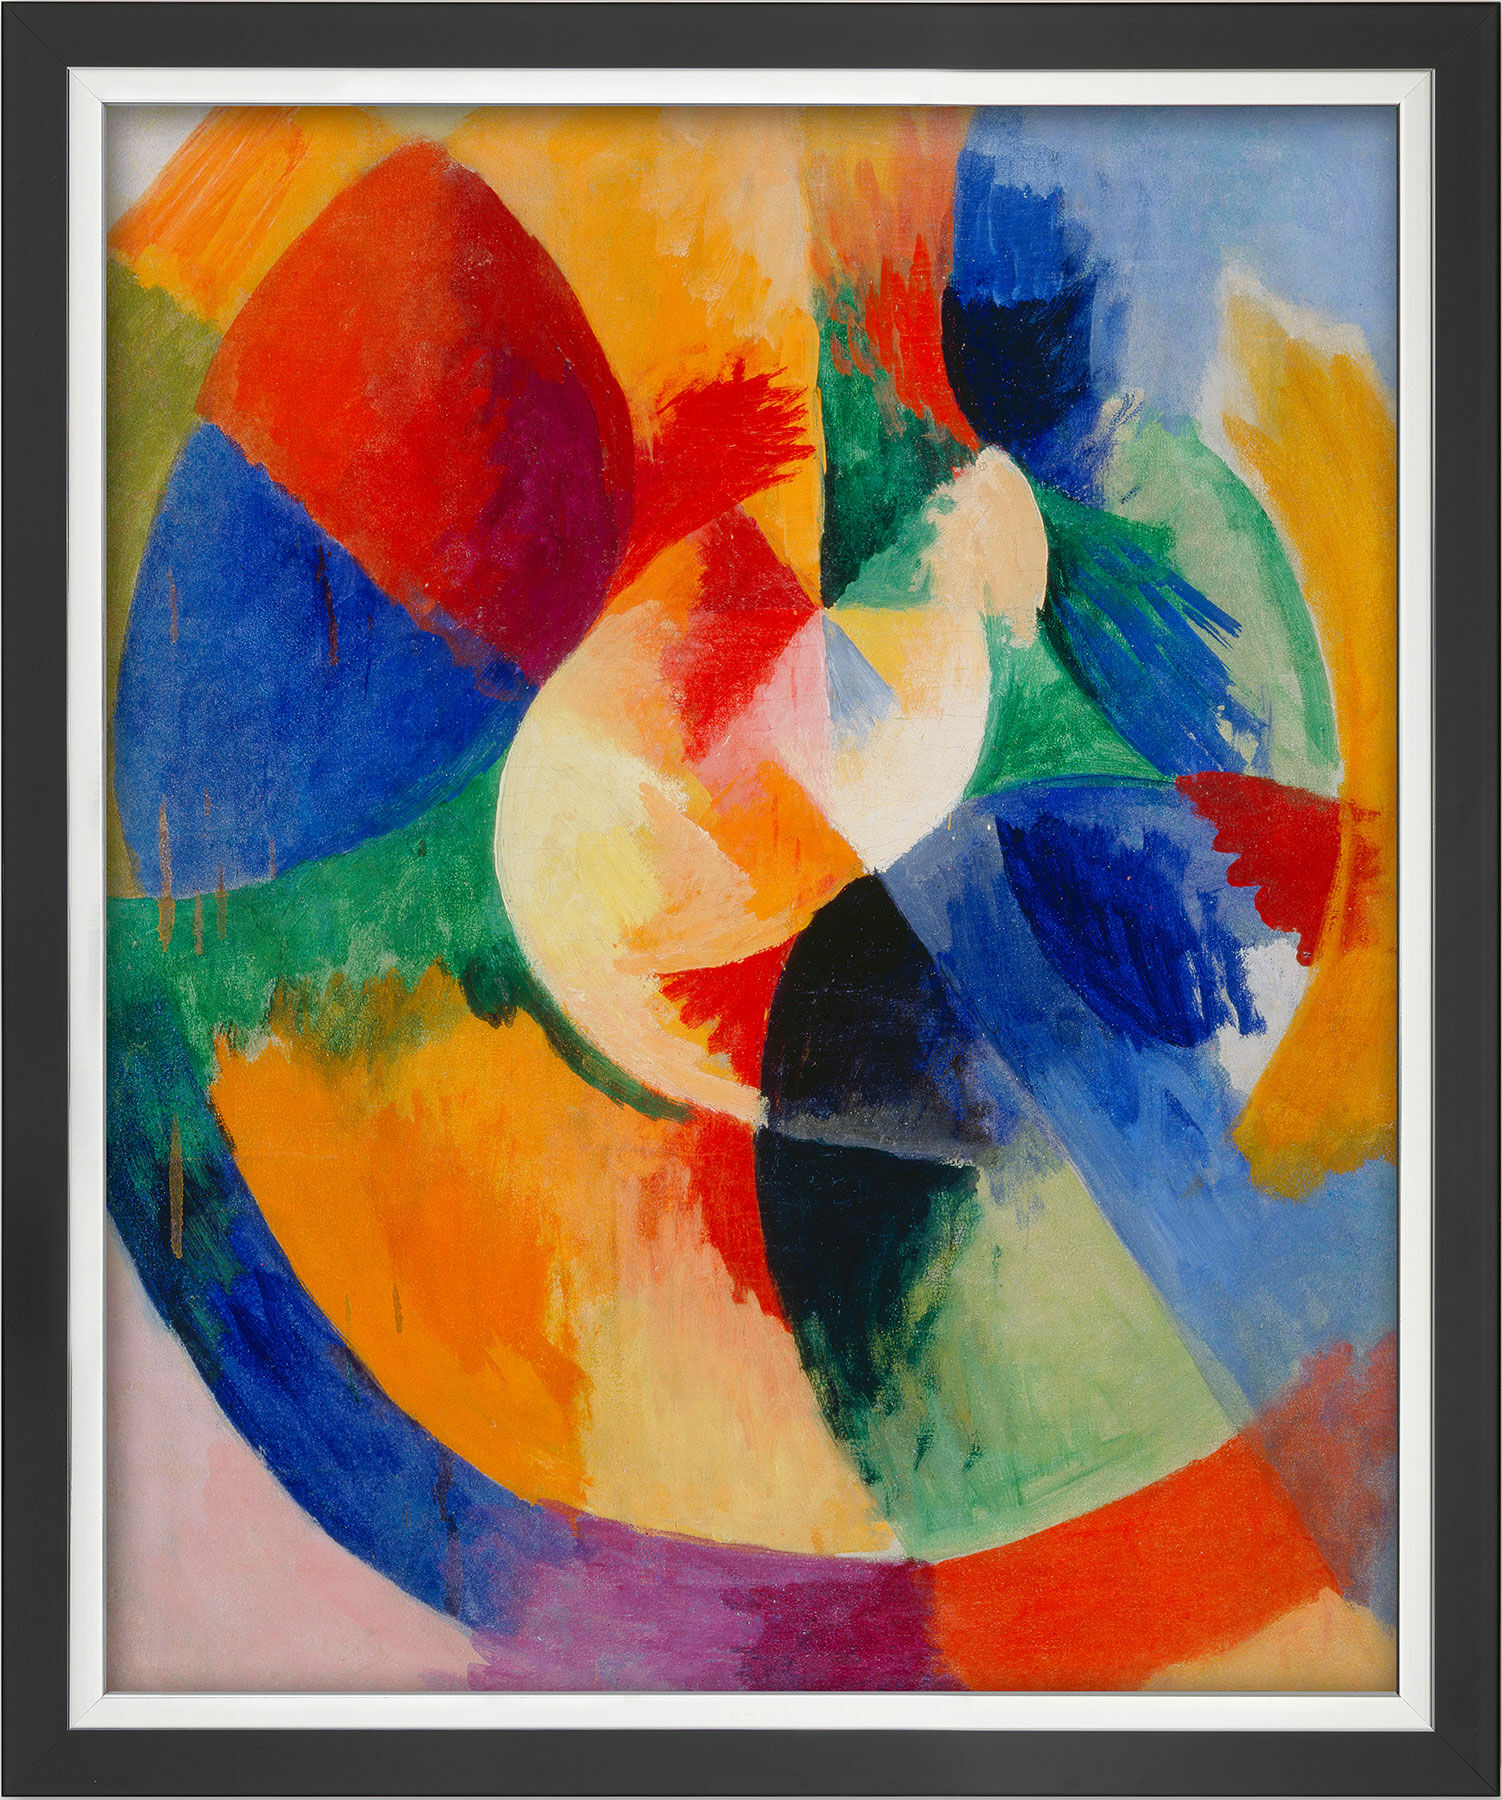 Picture "Circular Forms, Sun (Formes circulaires, soleil)" (1912/13), framed by Robert Delaunay